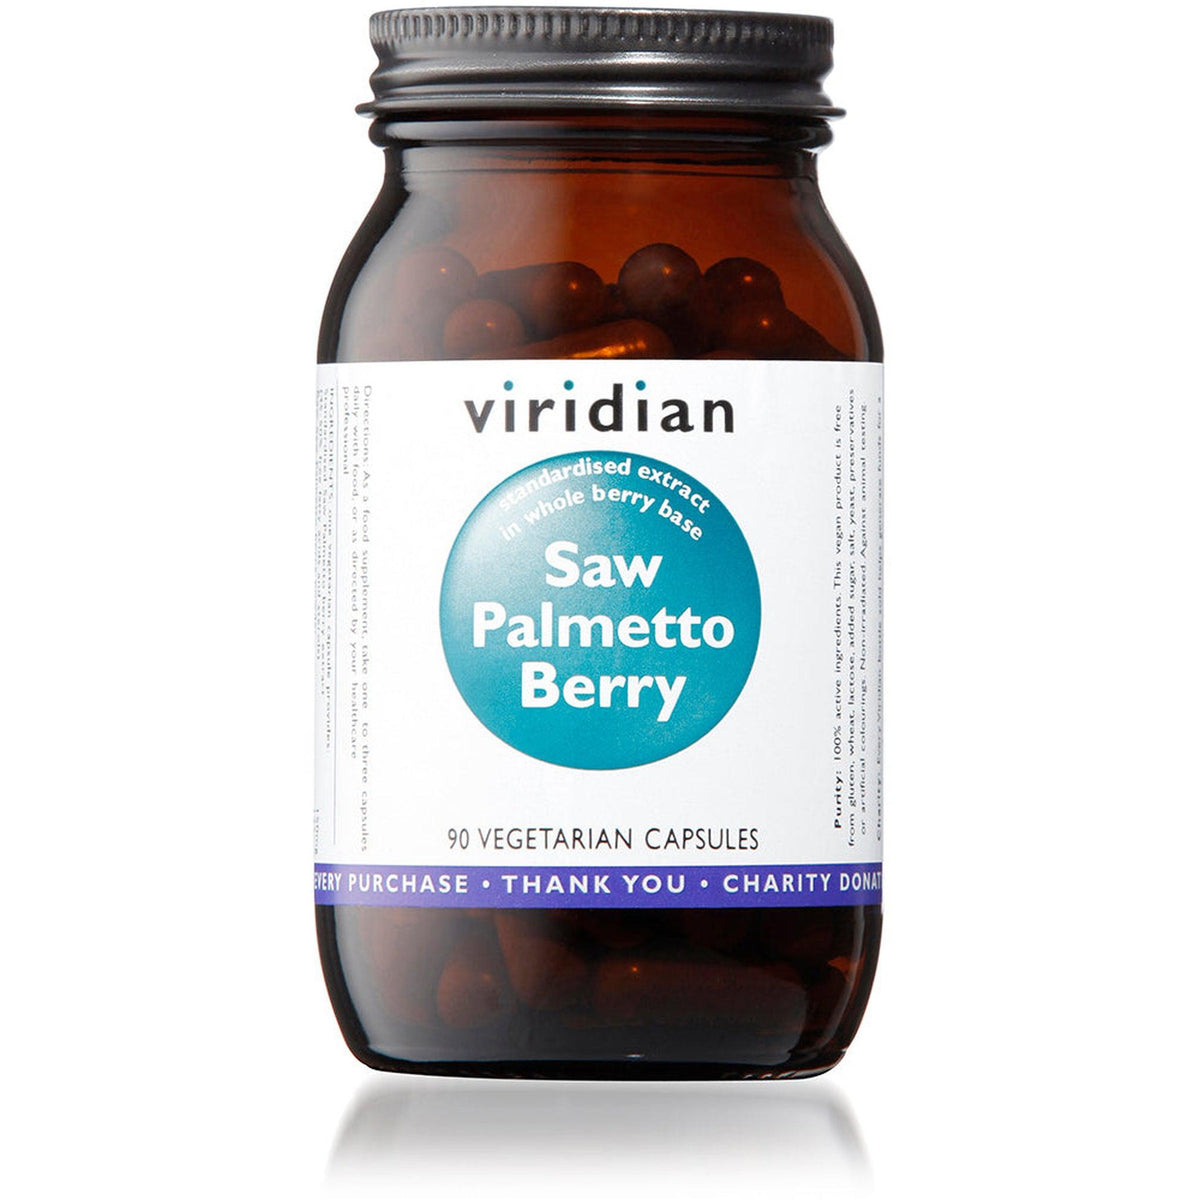 Viridian Saw Palmetto Berry Extract 90 Veg Caps- Lillys Pharmacy and Health Store